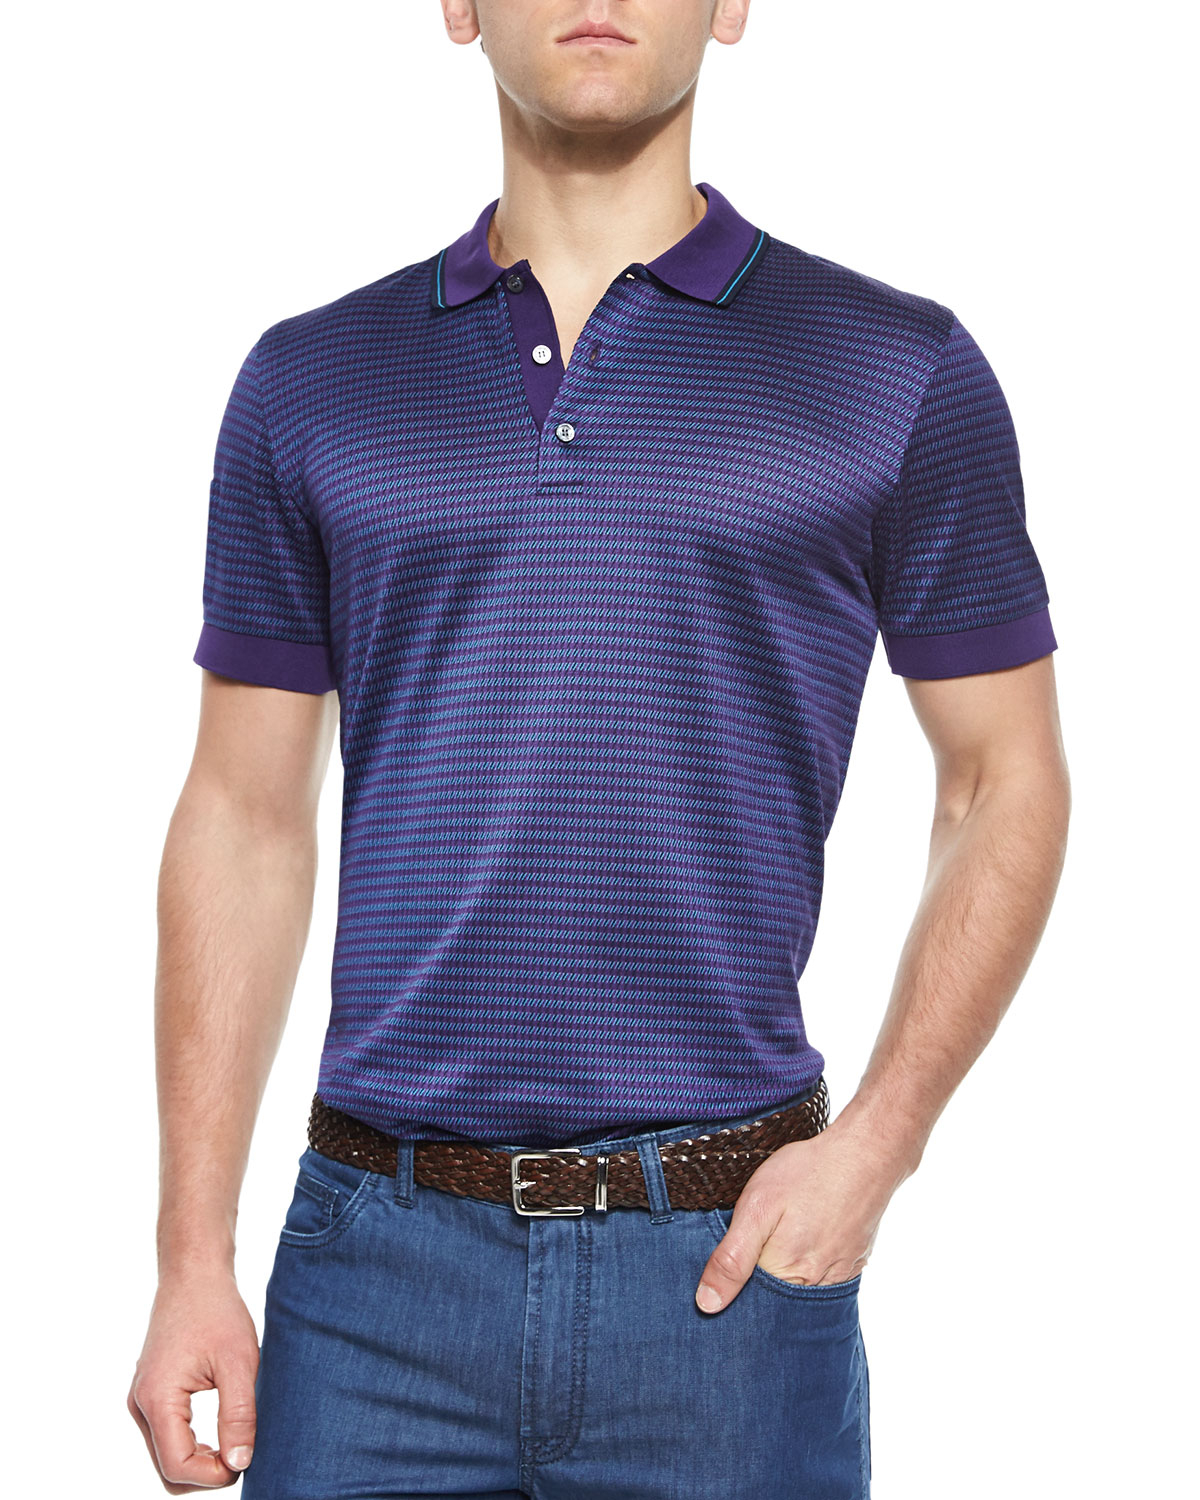 Lyst - Brioni Woven Jacquard Polo Shirt in Purple for Men